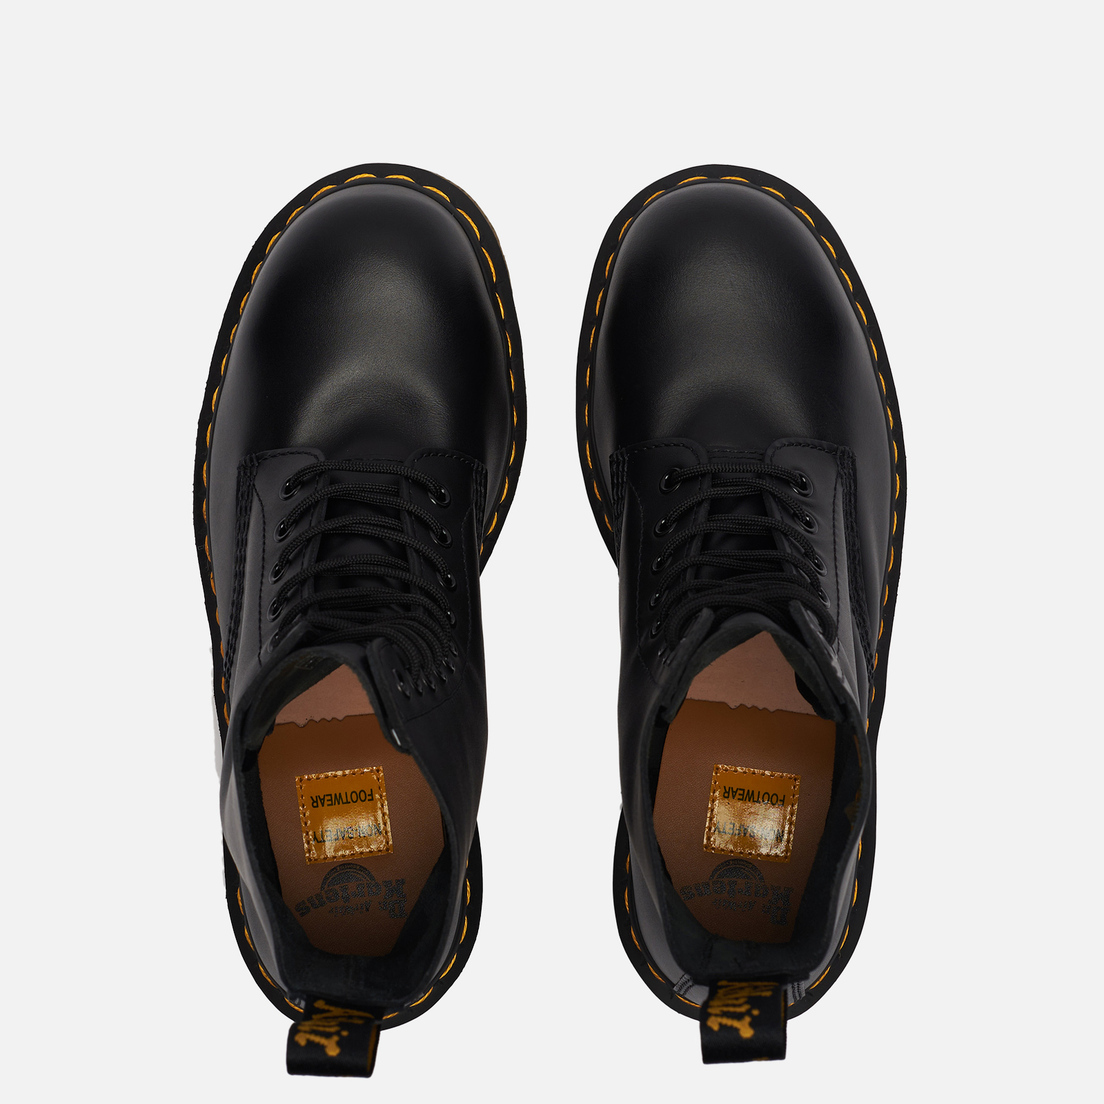 Dr. Martens Ботинки 1919 Black Fine Haircell